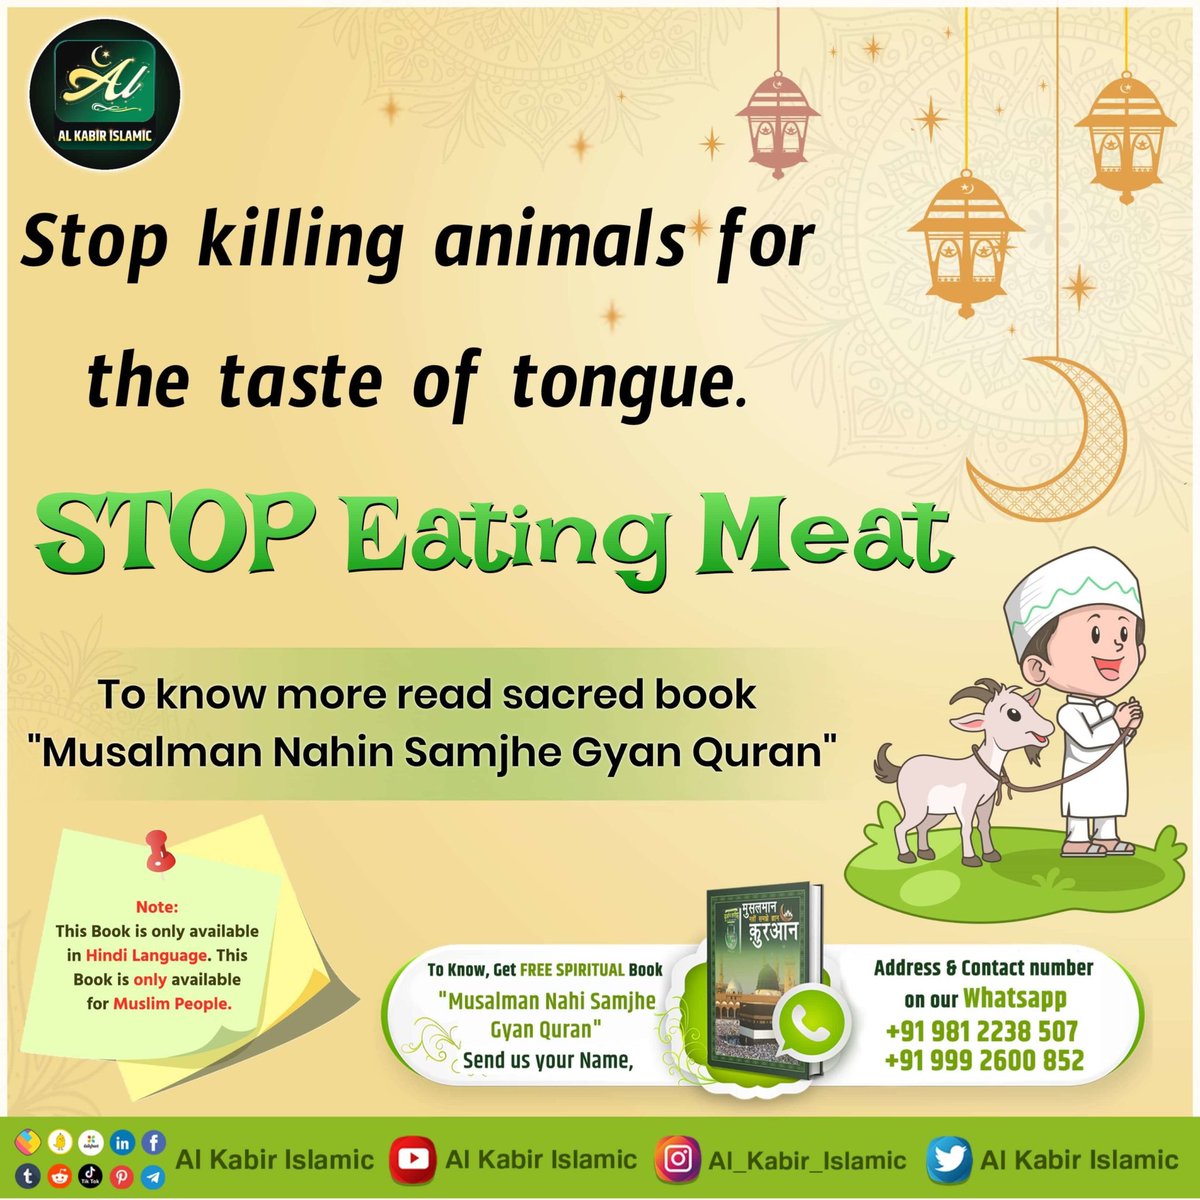 #रहम_करो_मूक_जीवों_पर
Stop killing animals for the taste of tongue.
Stop Eating Meat